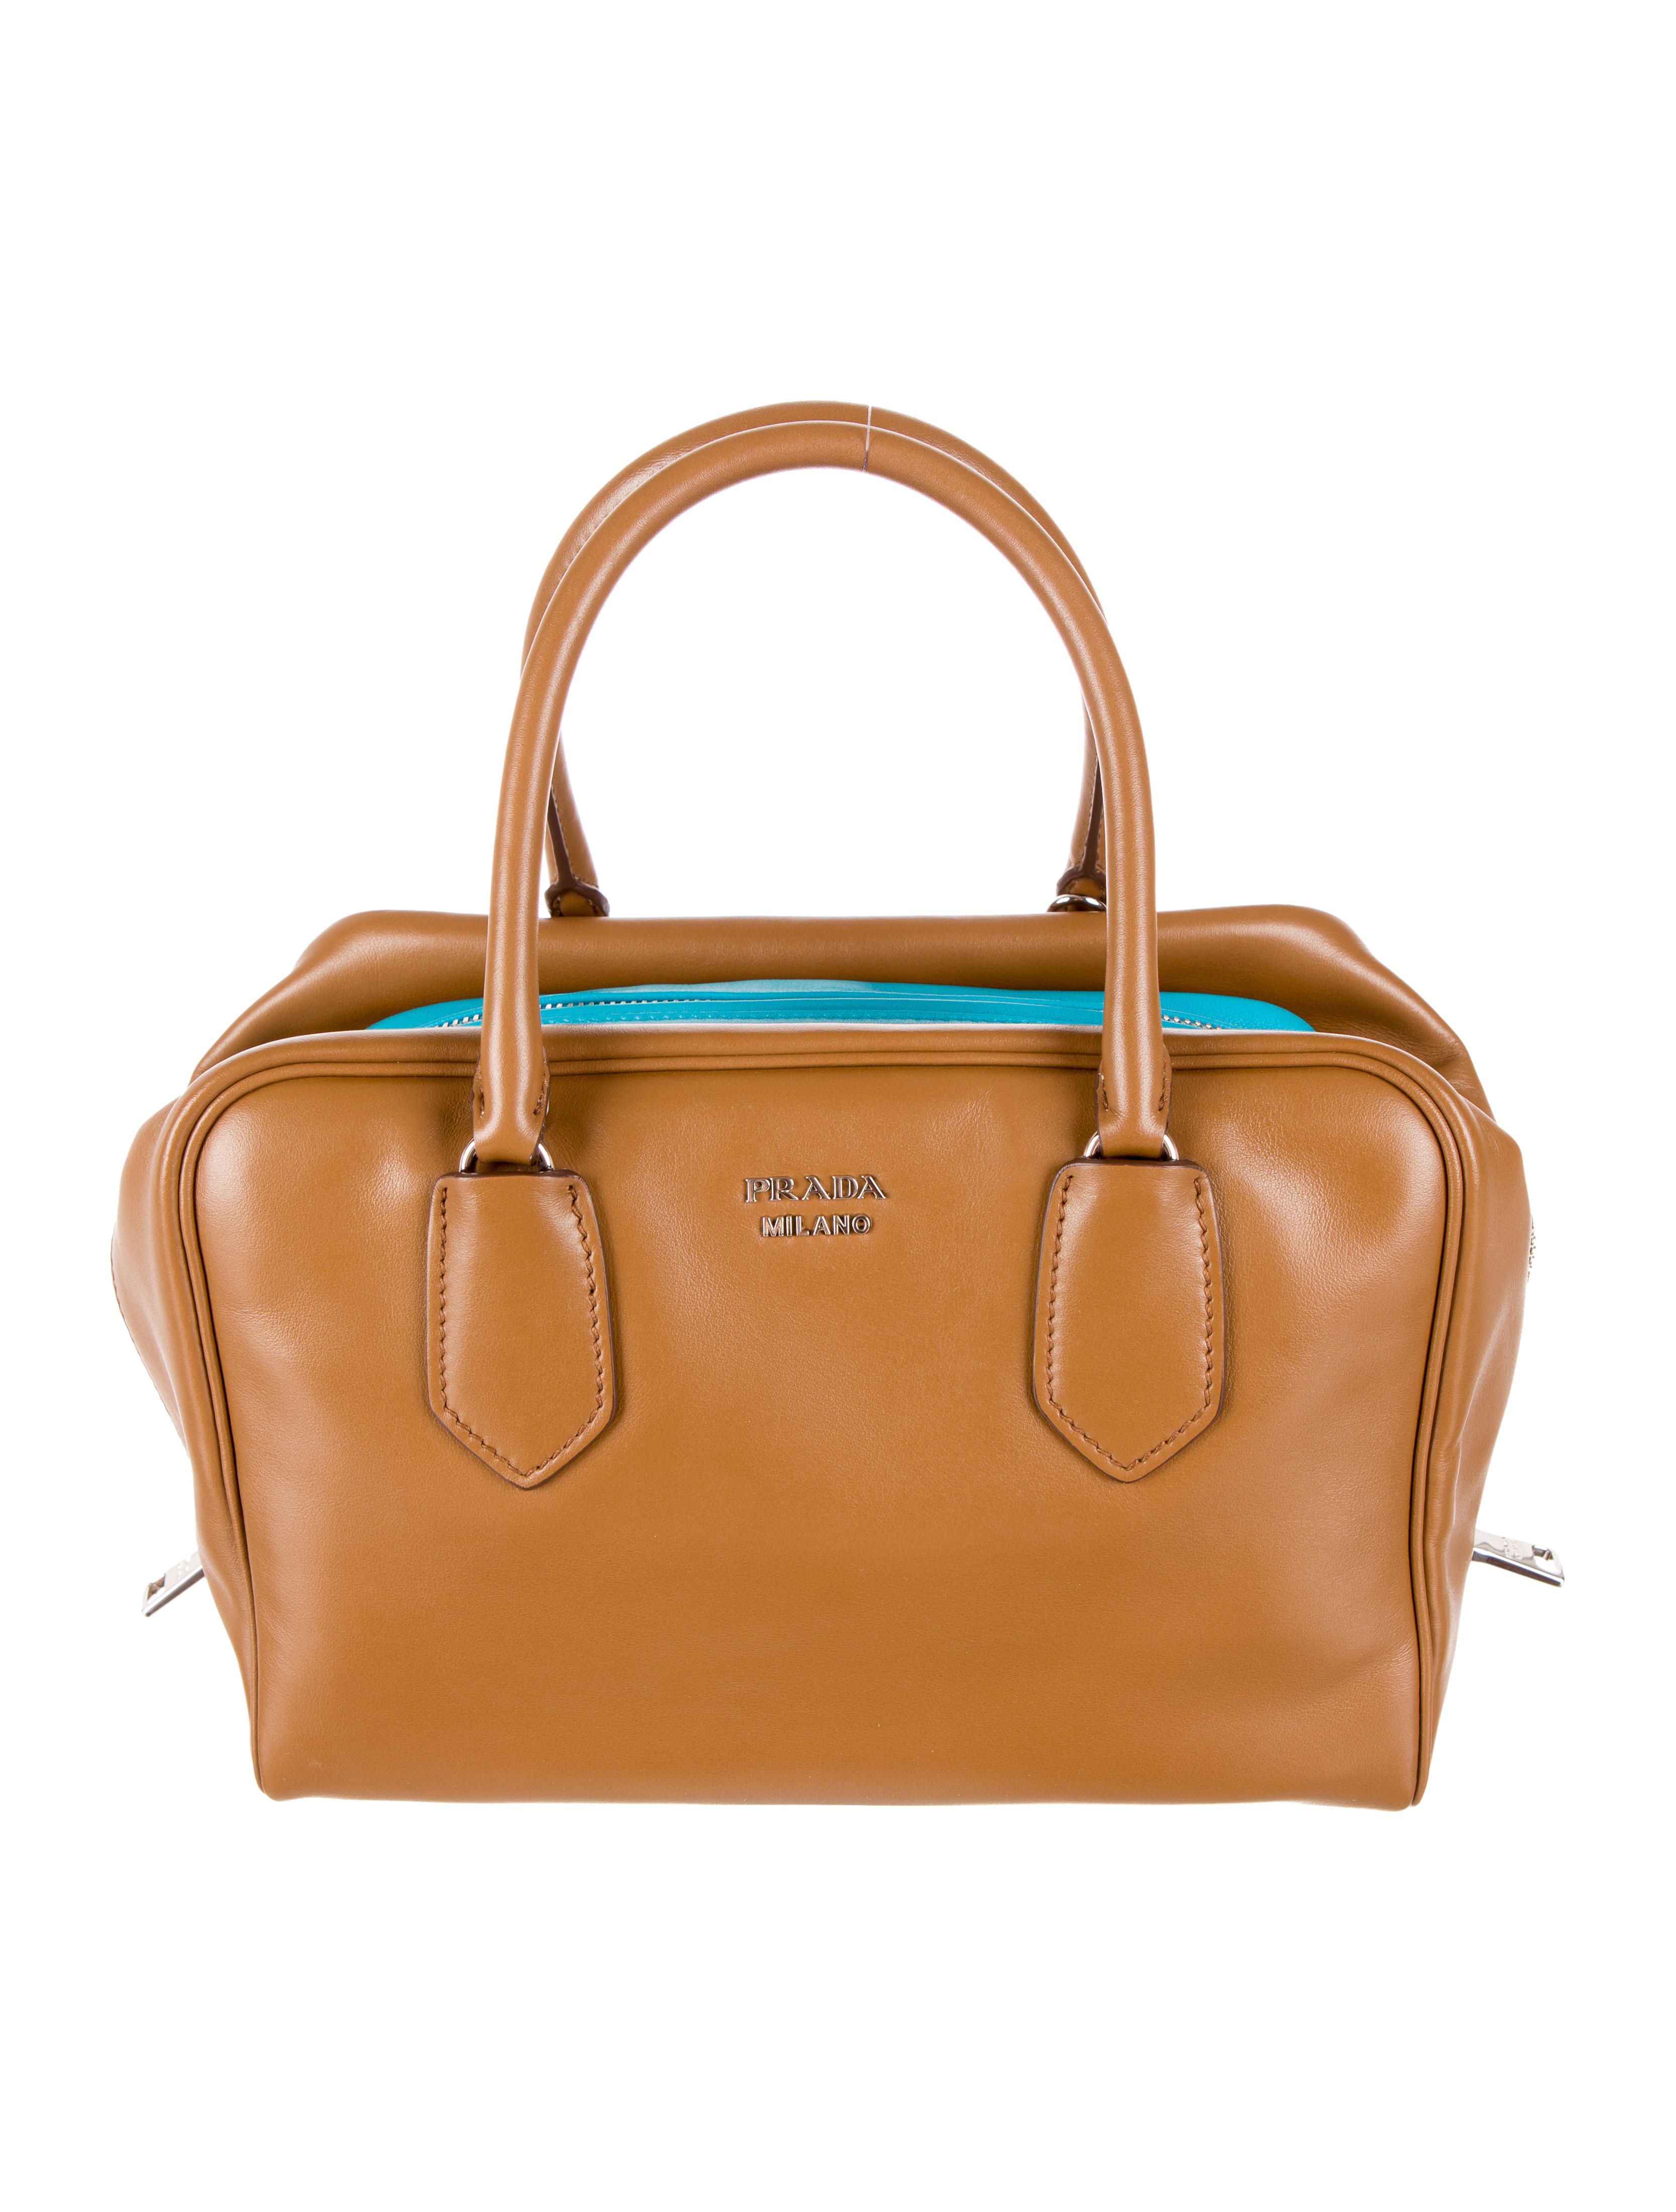 Introducing you to a new bag obsession: Monogram Trapeze Bag. This